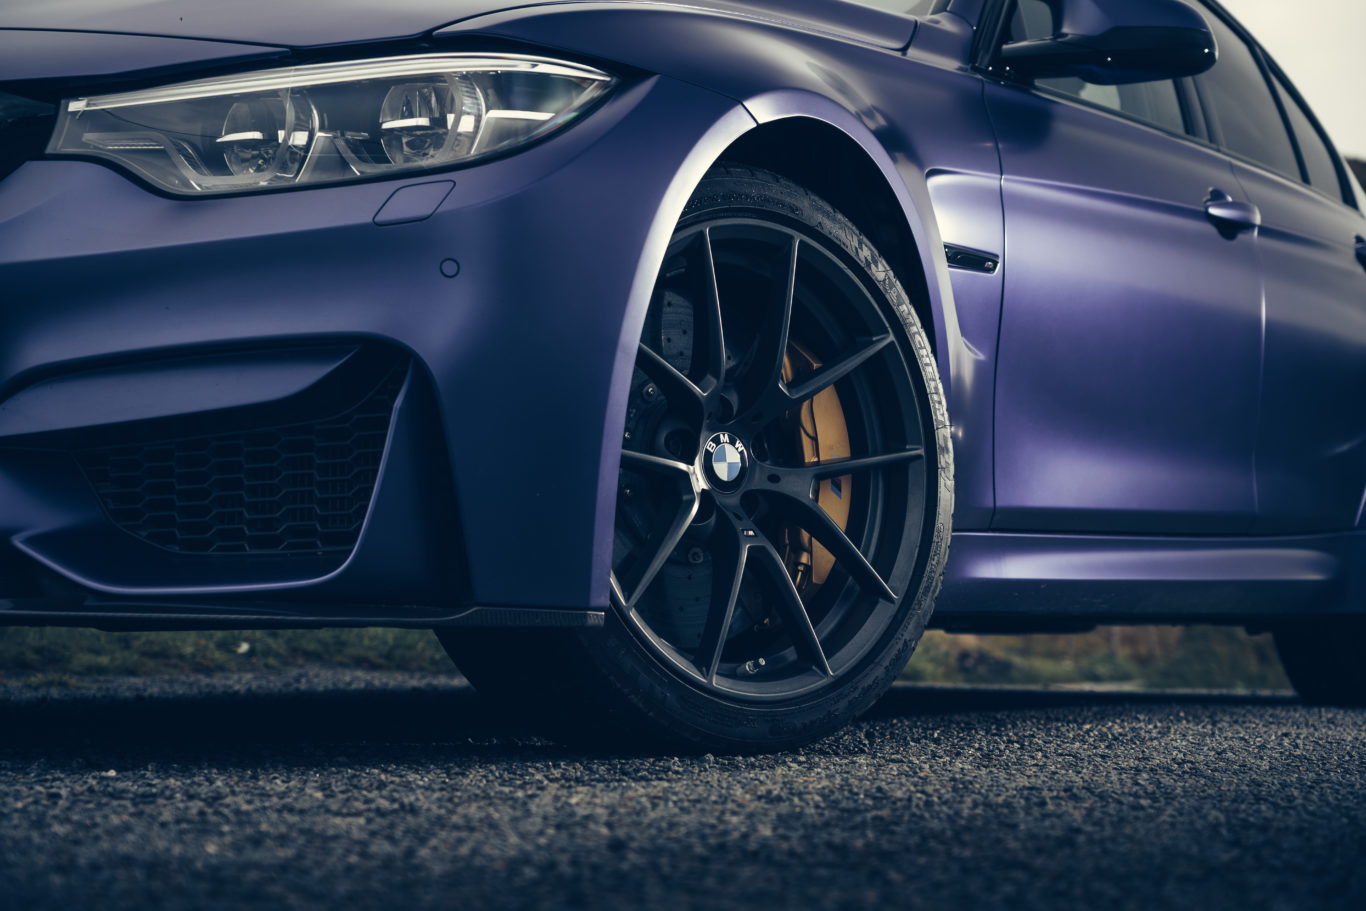 The M3's low ride height did mean a little extra caution was required when driving